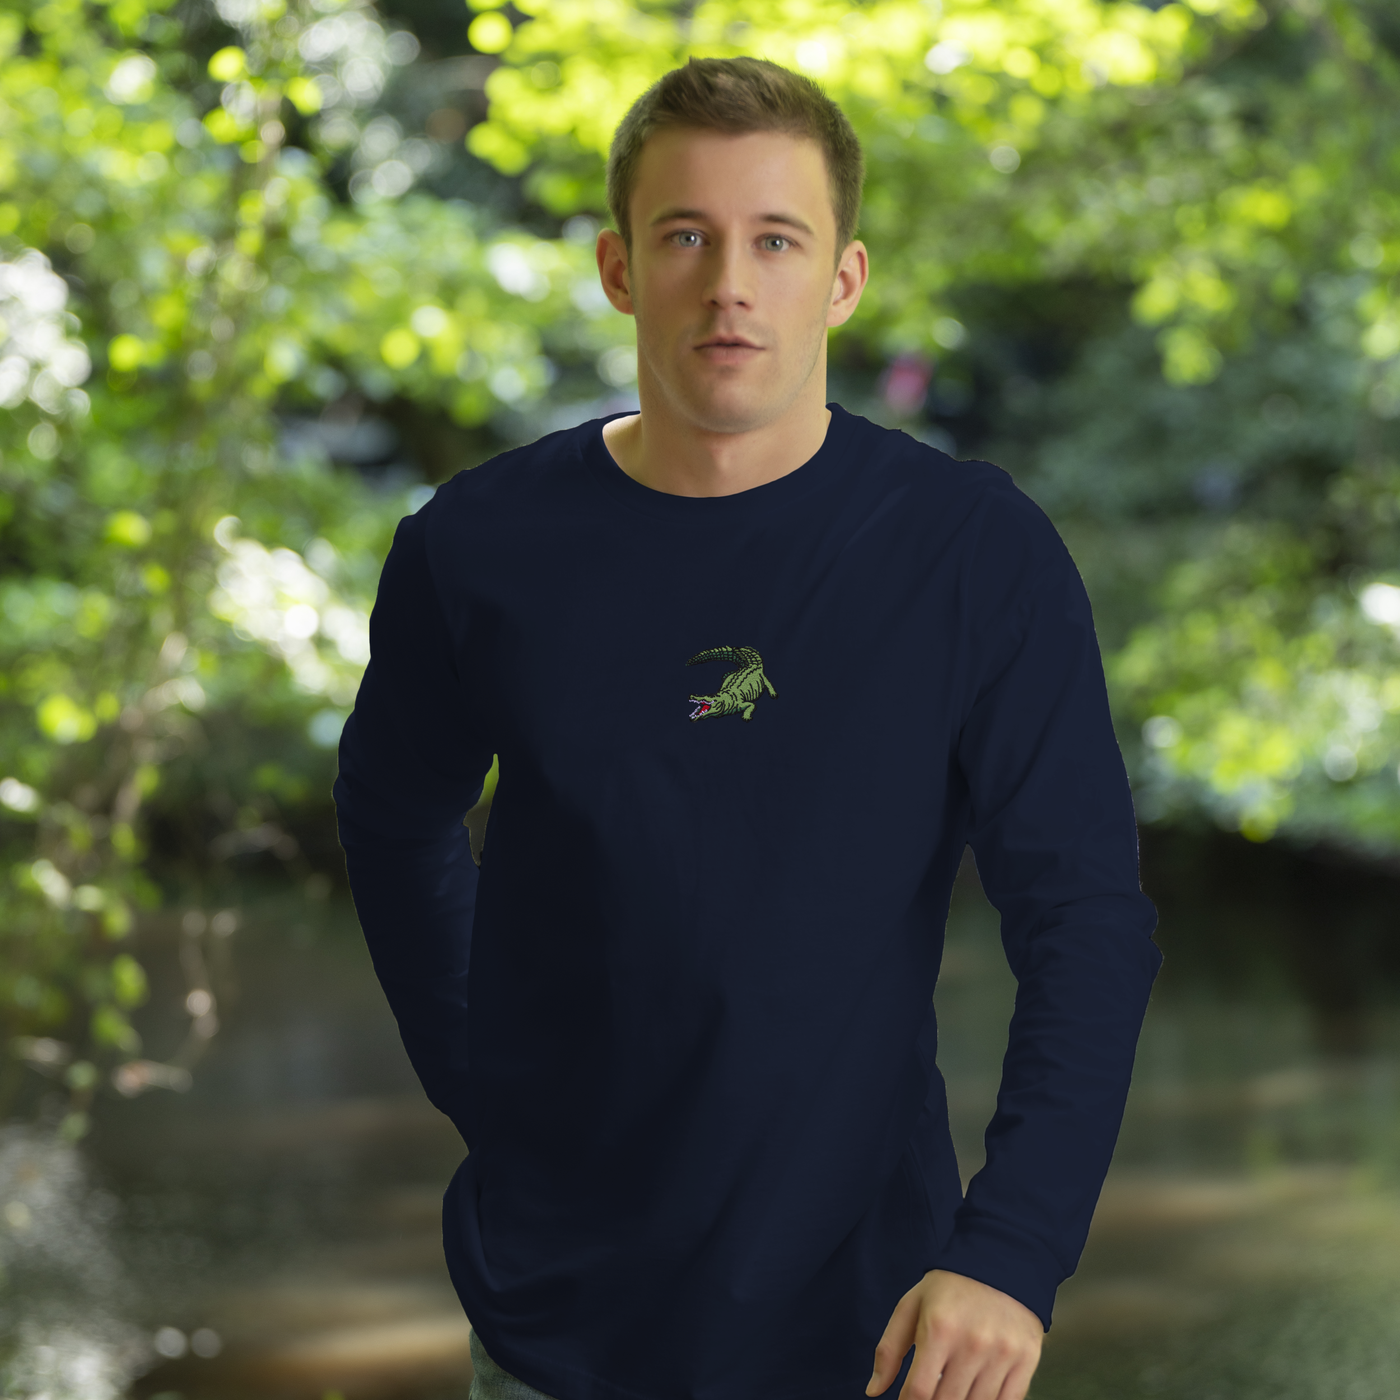 Bobby's Planet Men's Embroidered Saltwater Crocodile Long Sleeve Shirt from Australia Down Under Animals Collection in Navy Color#color_navy